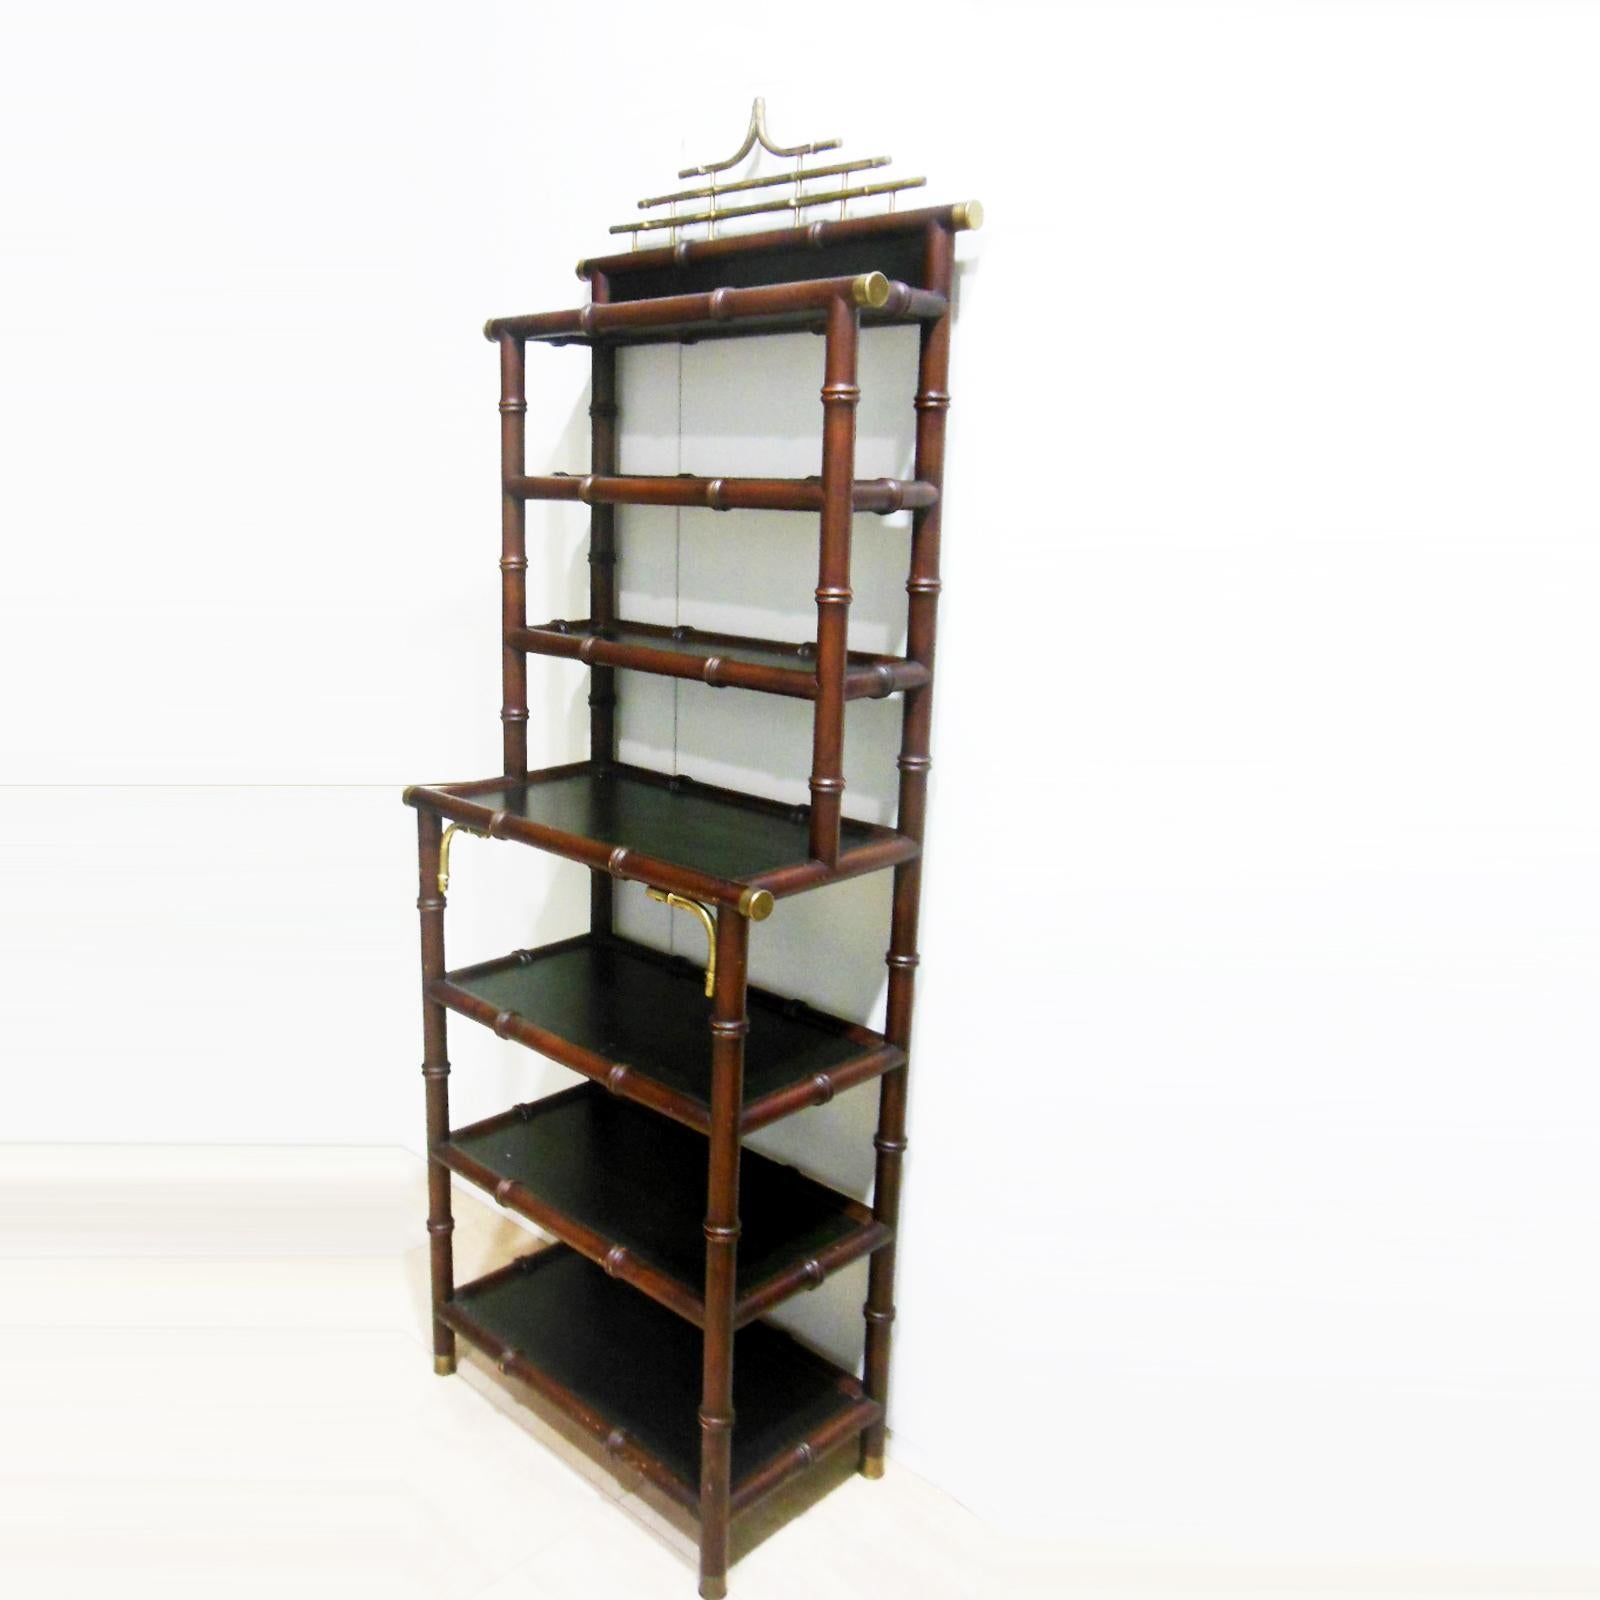 English Midcentury Fuax Bamboo Étagère, Chippendale Chinoiserie Style, 1950s